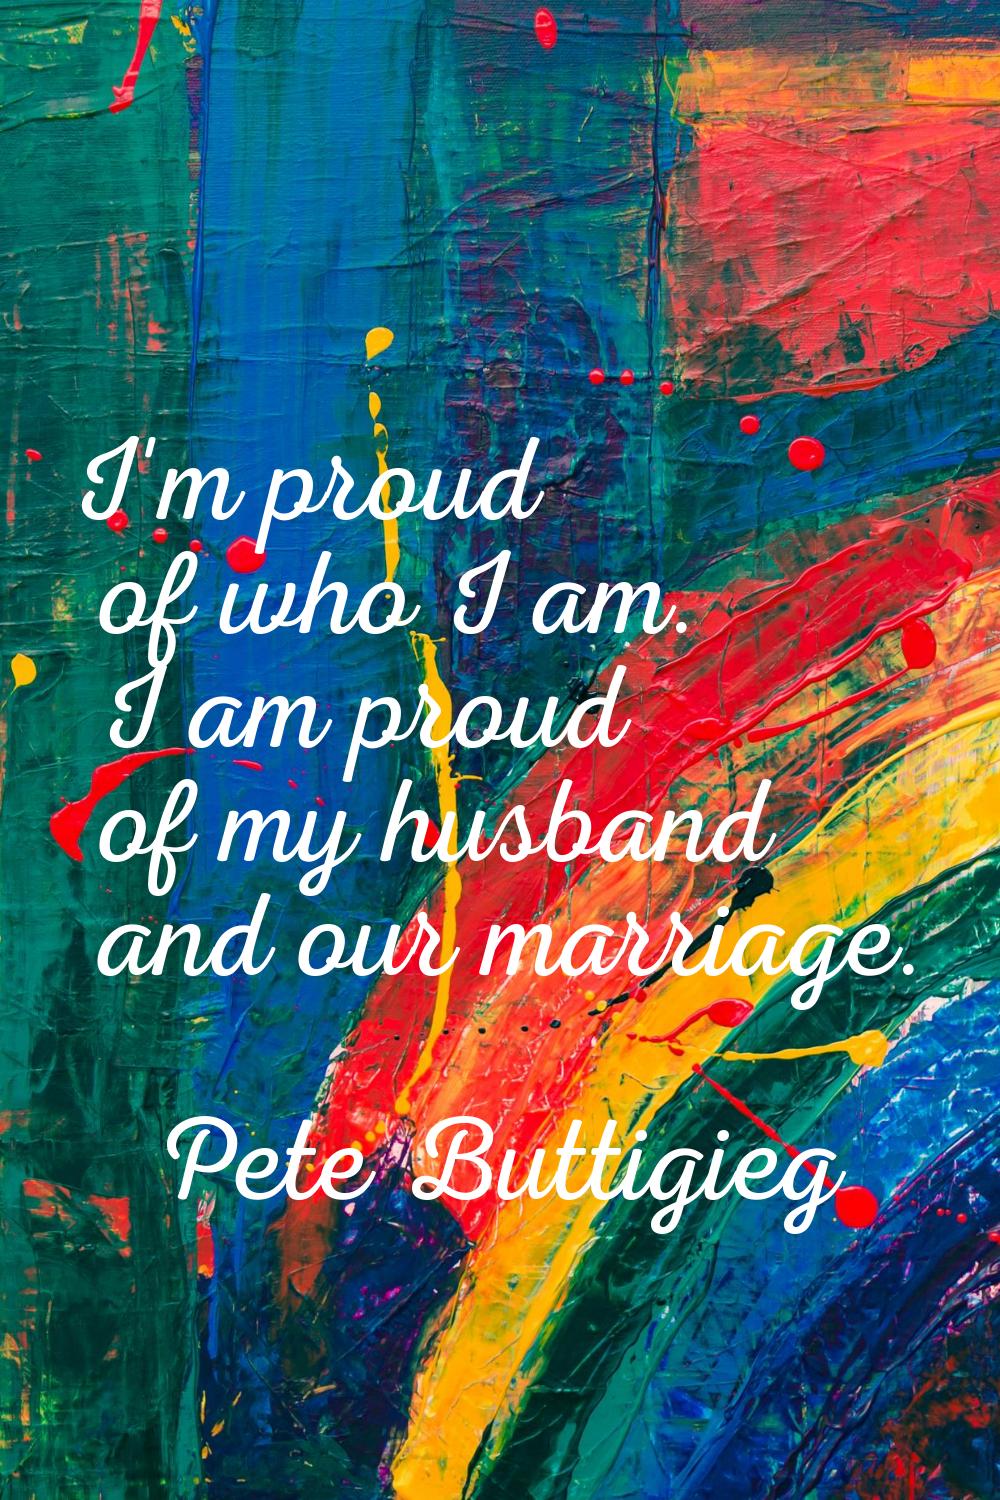 I'm proud of who I am. I am proud of my husband and our marriage.